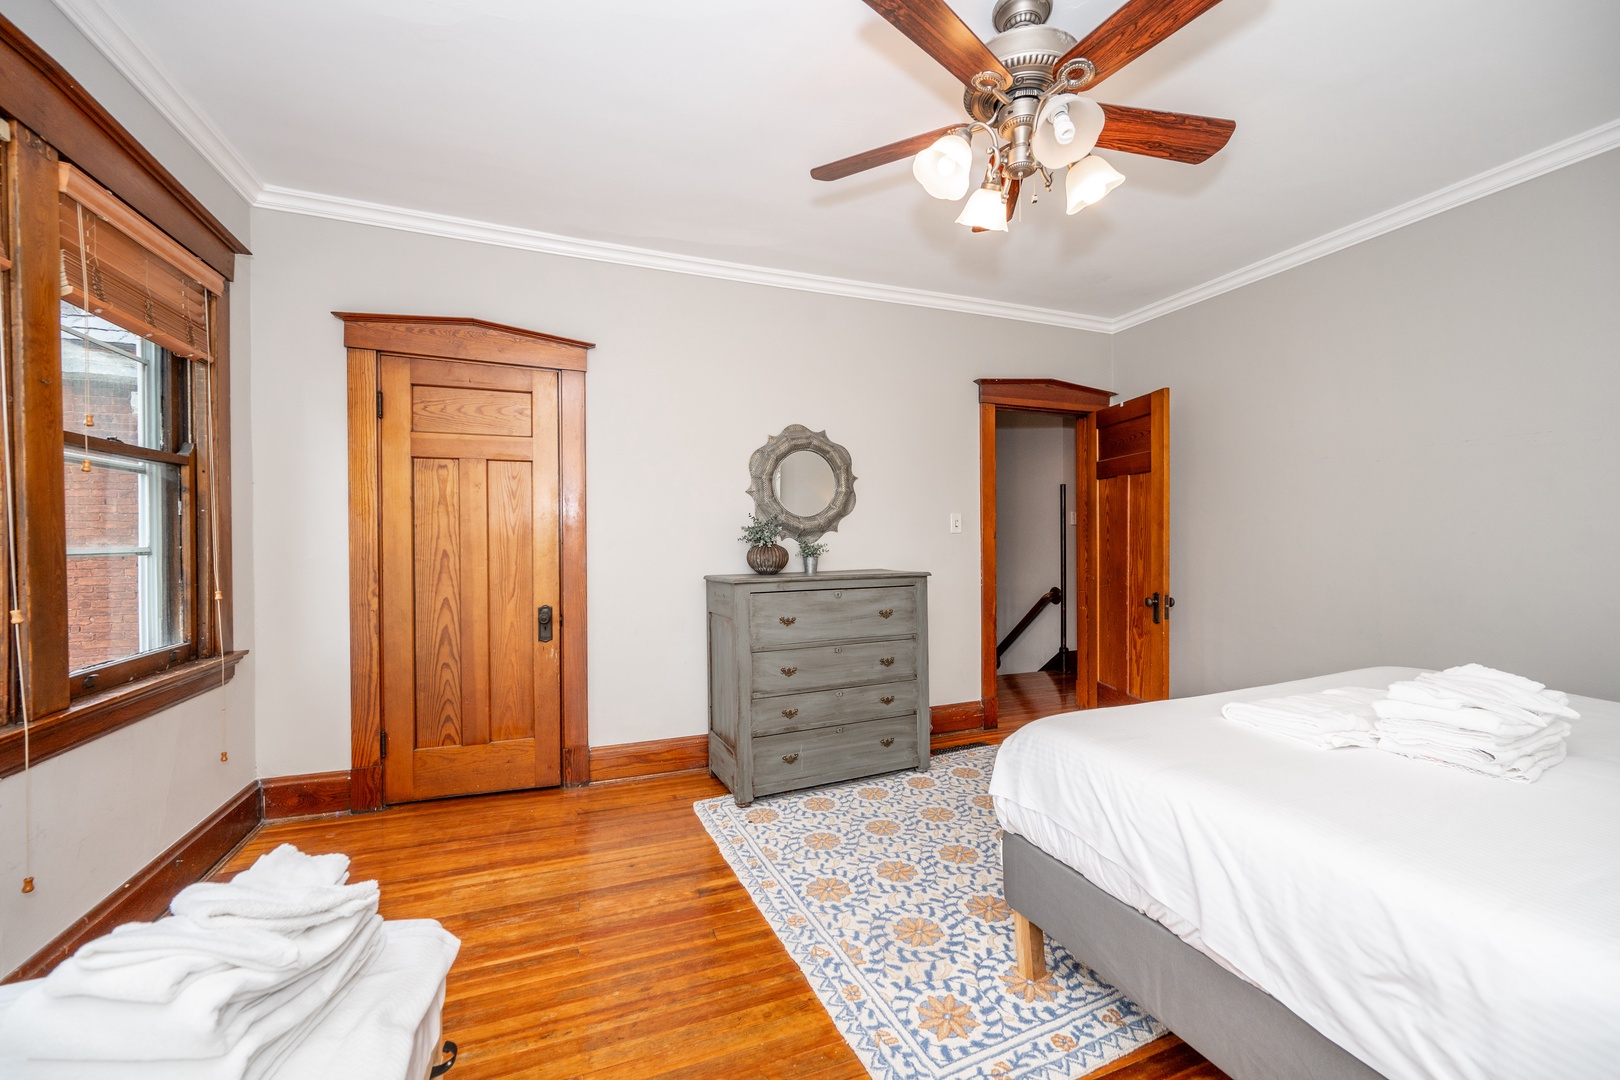 This bedroom retreat on the 2nd floor offers a plush king & twin bed